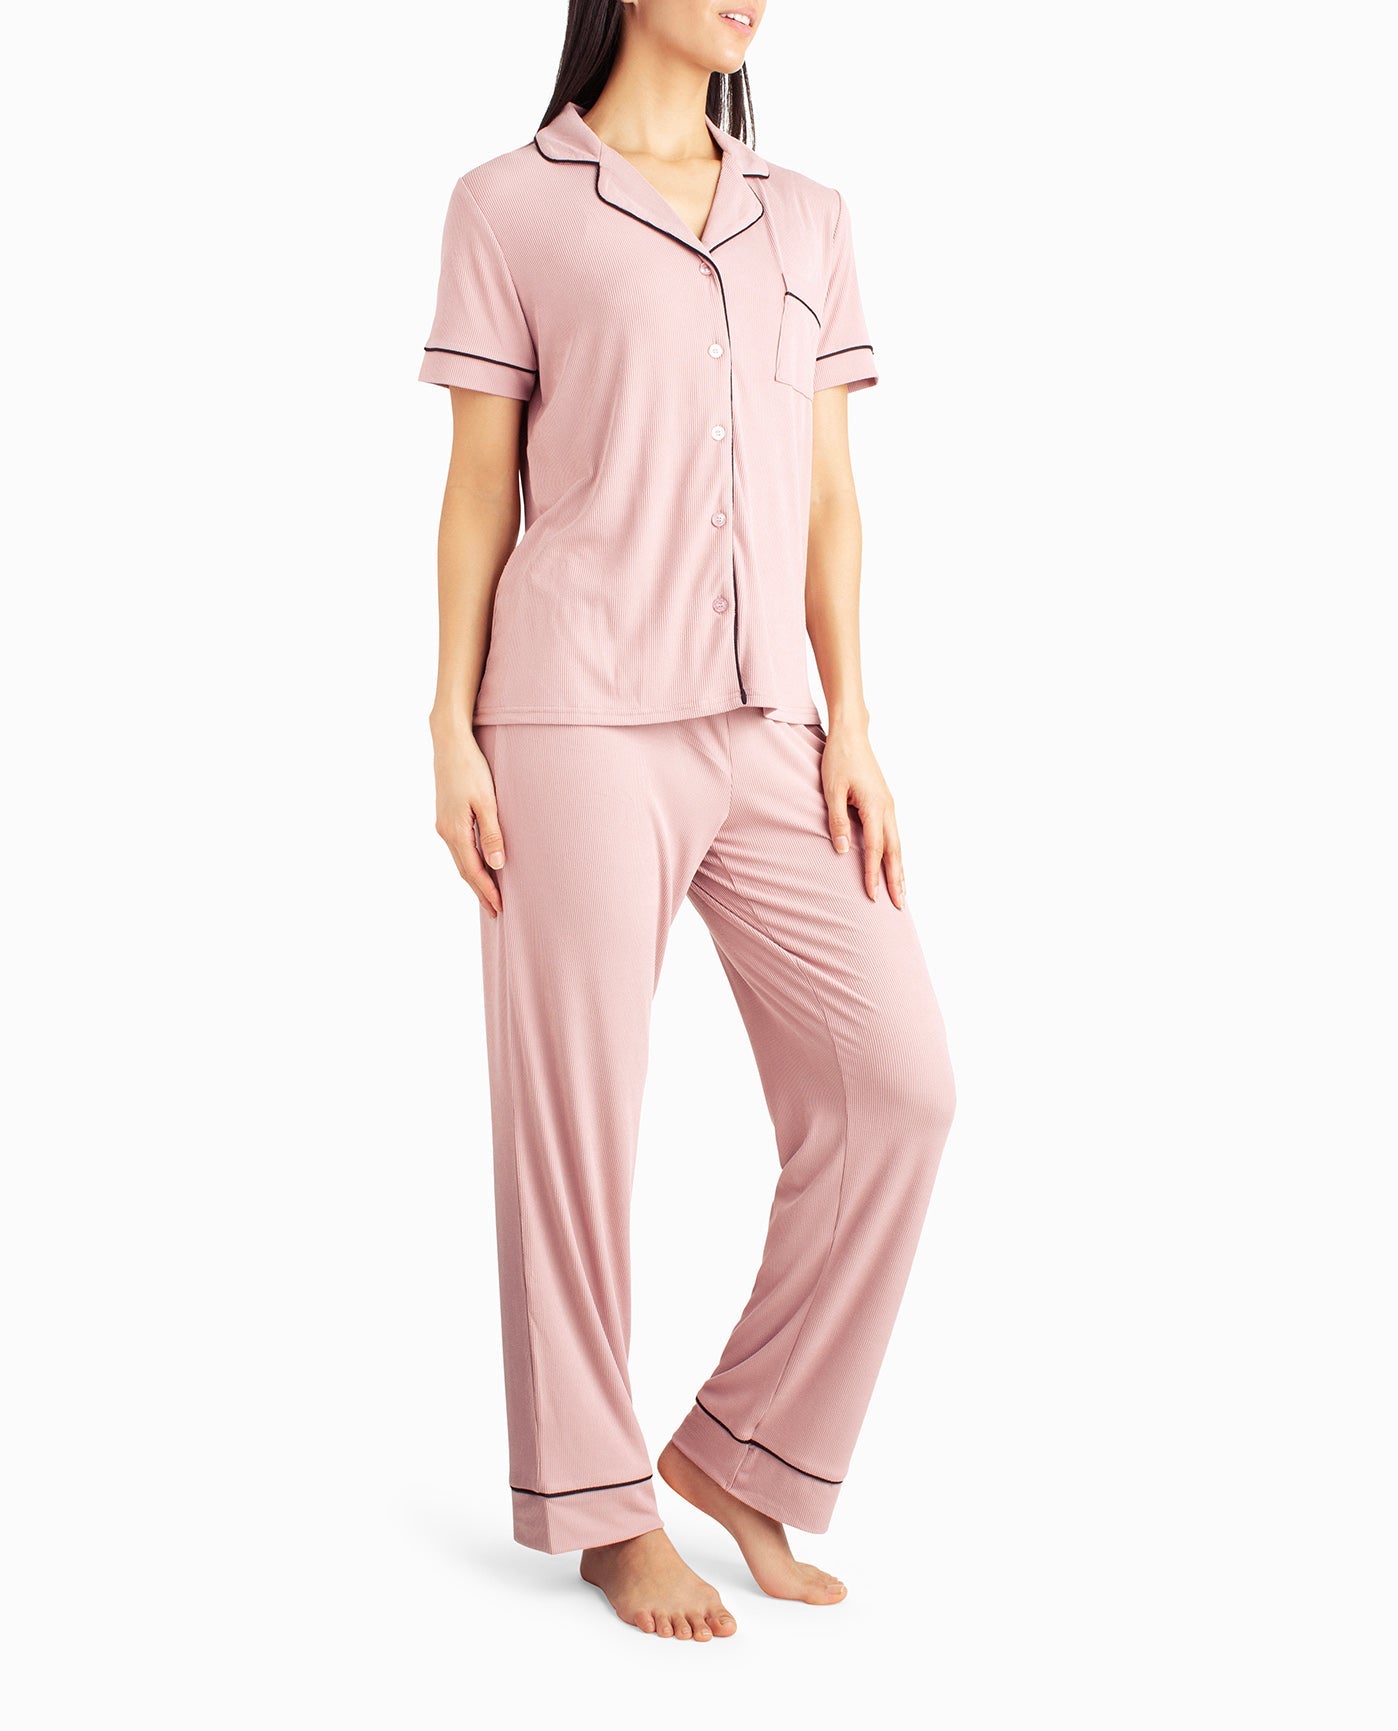 SIDE OF RIBBED SHIRT AND PANT TWO-PIECE SLEEPWEAR SET | Gemini